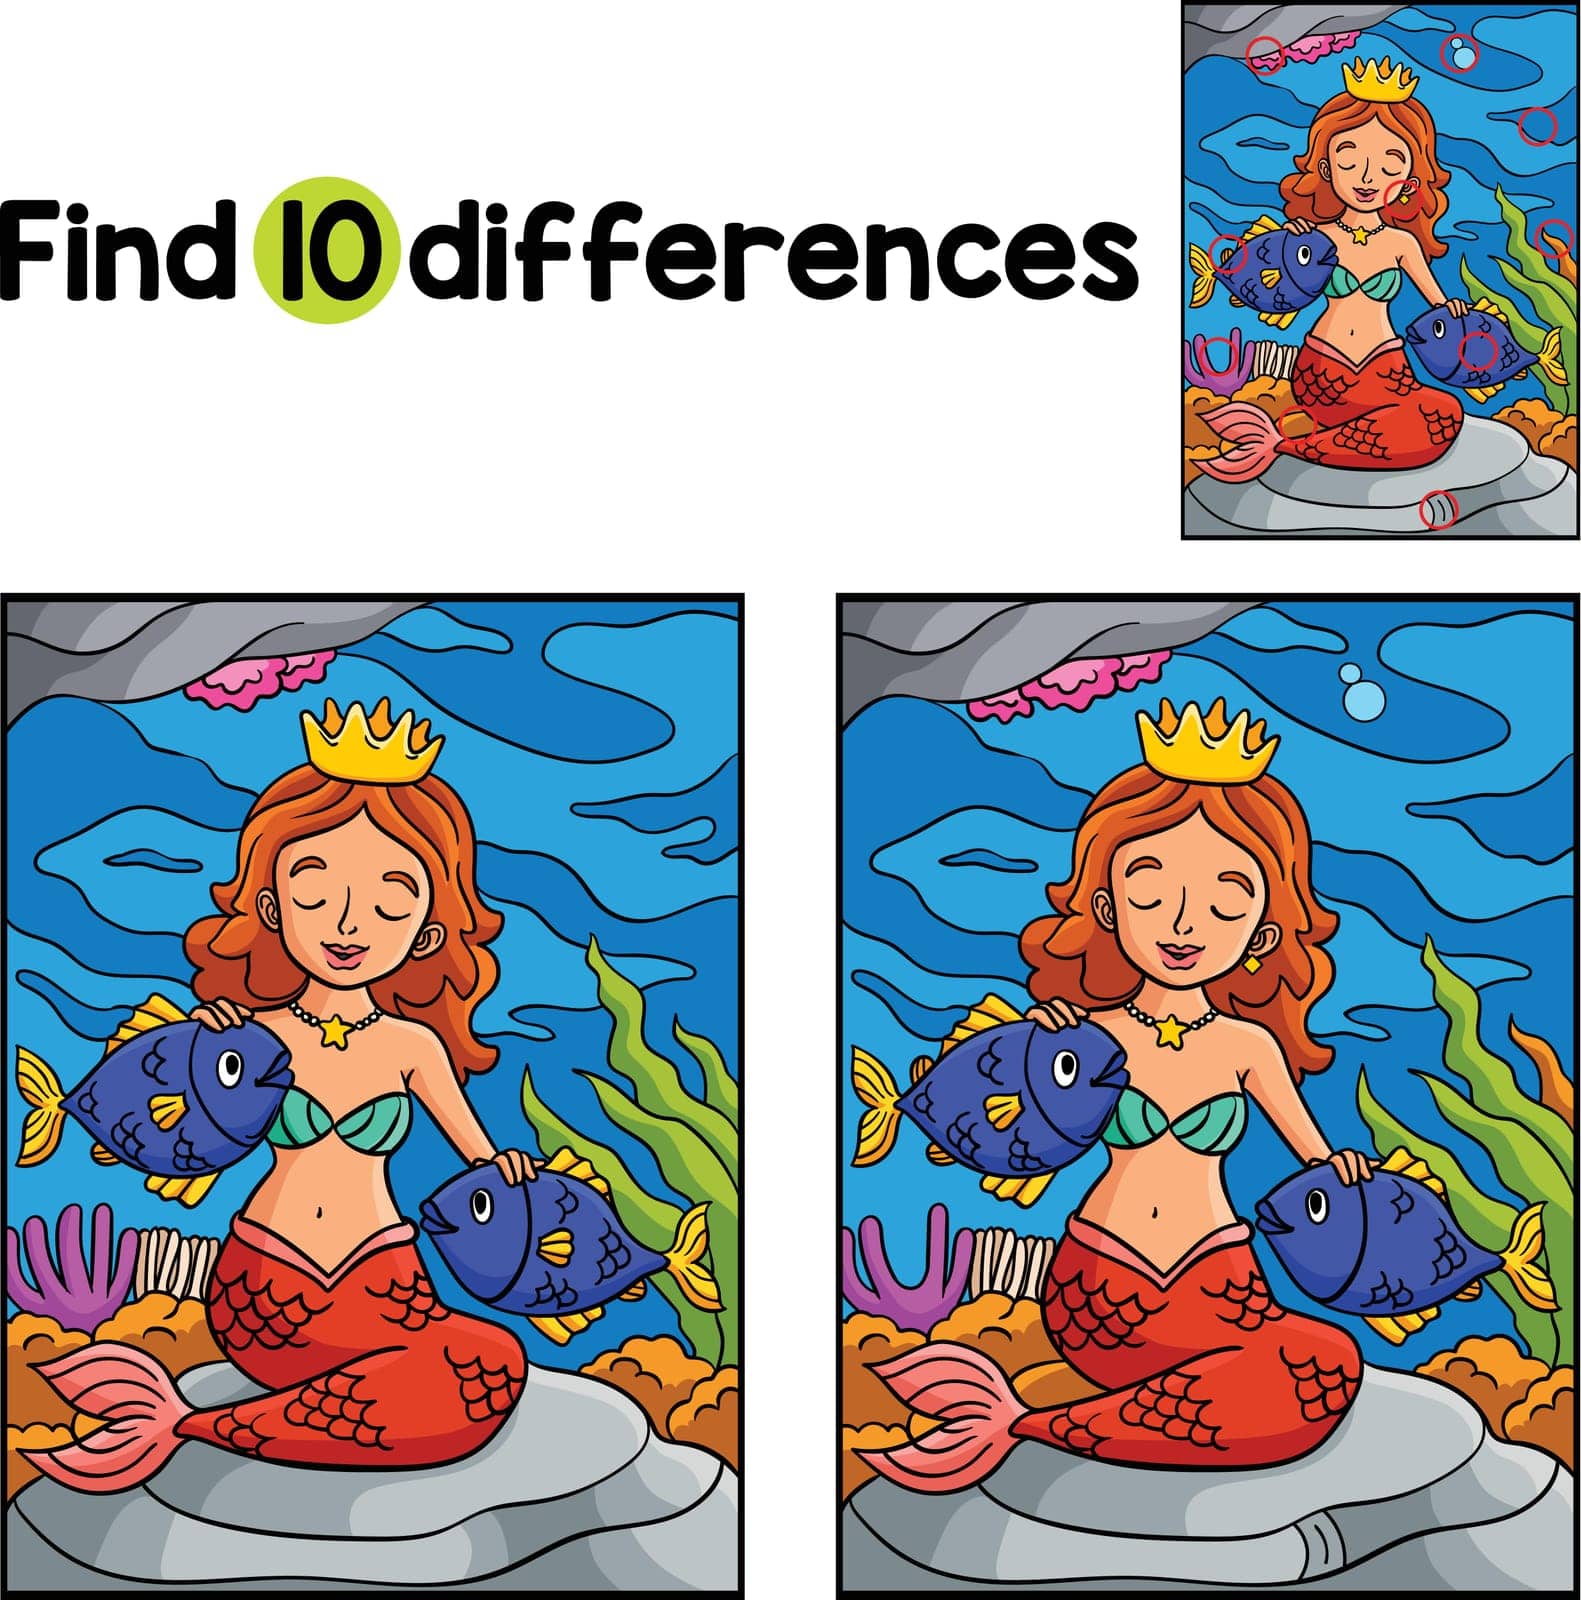 Find or spot the differences on this Princess Mermaid and Fish Kids activity page. A funny and educational puzzle-matching game for children.